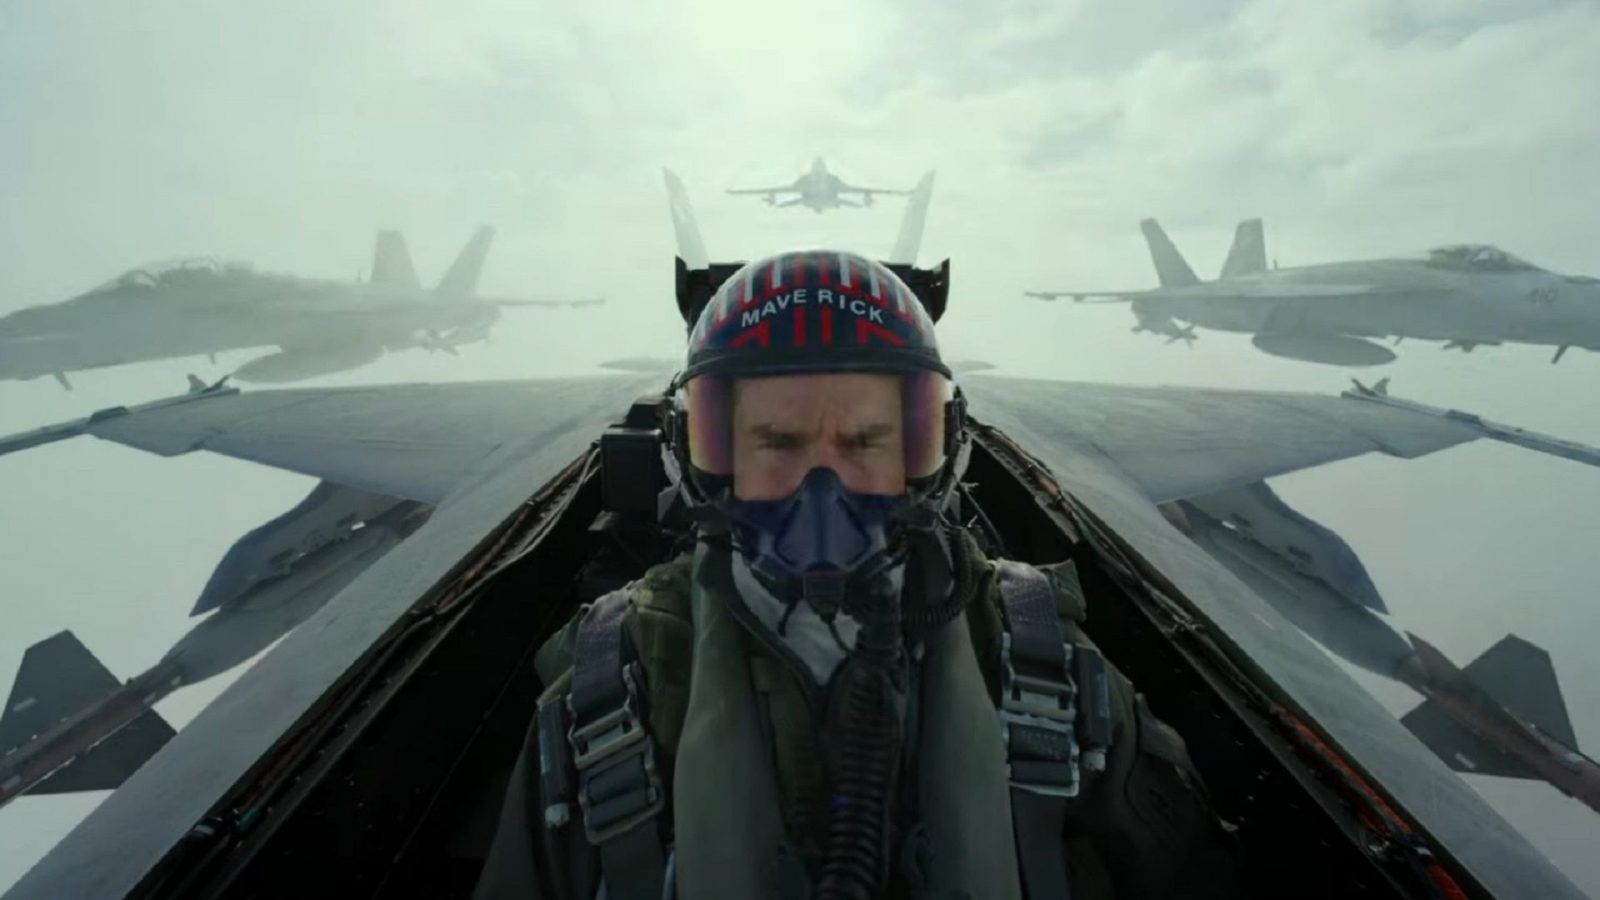 10 of the highest-grossing films of 2022: The Batman to Top Gun